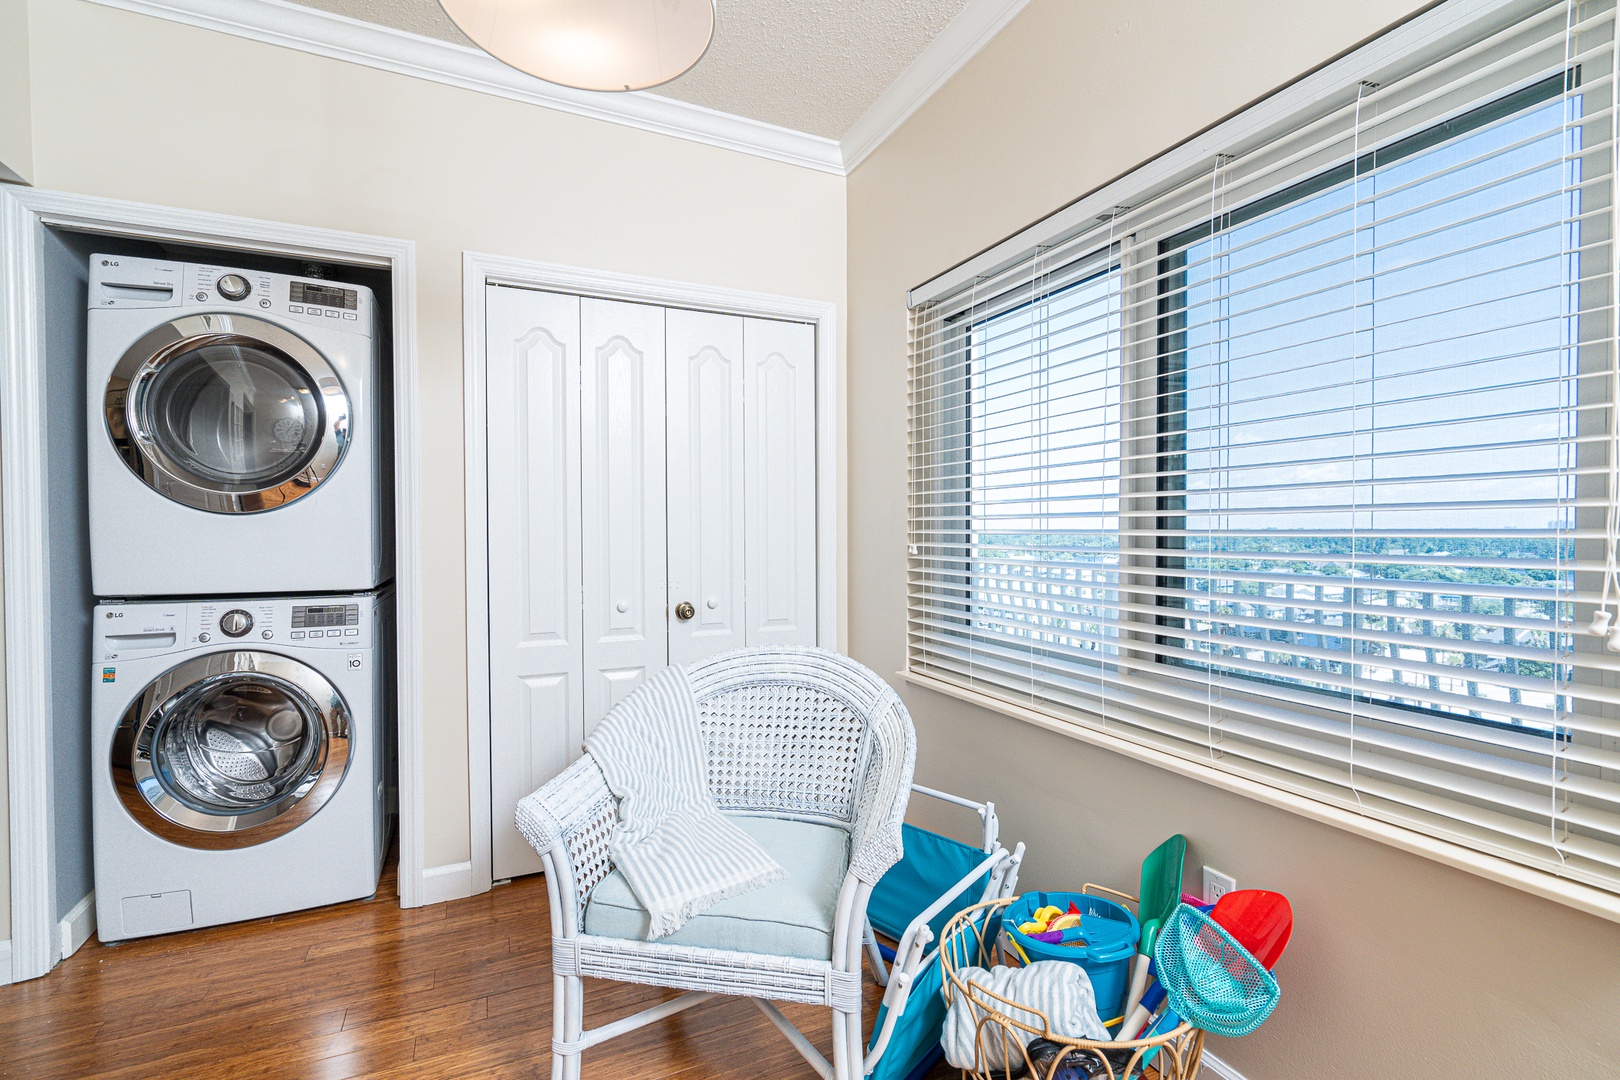 Private laundry is available for your stay, located just off the entrance